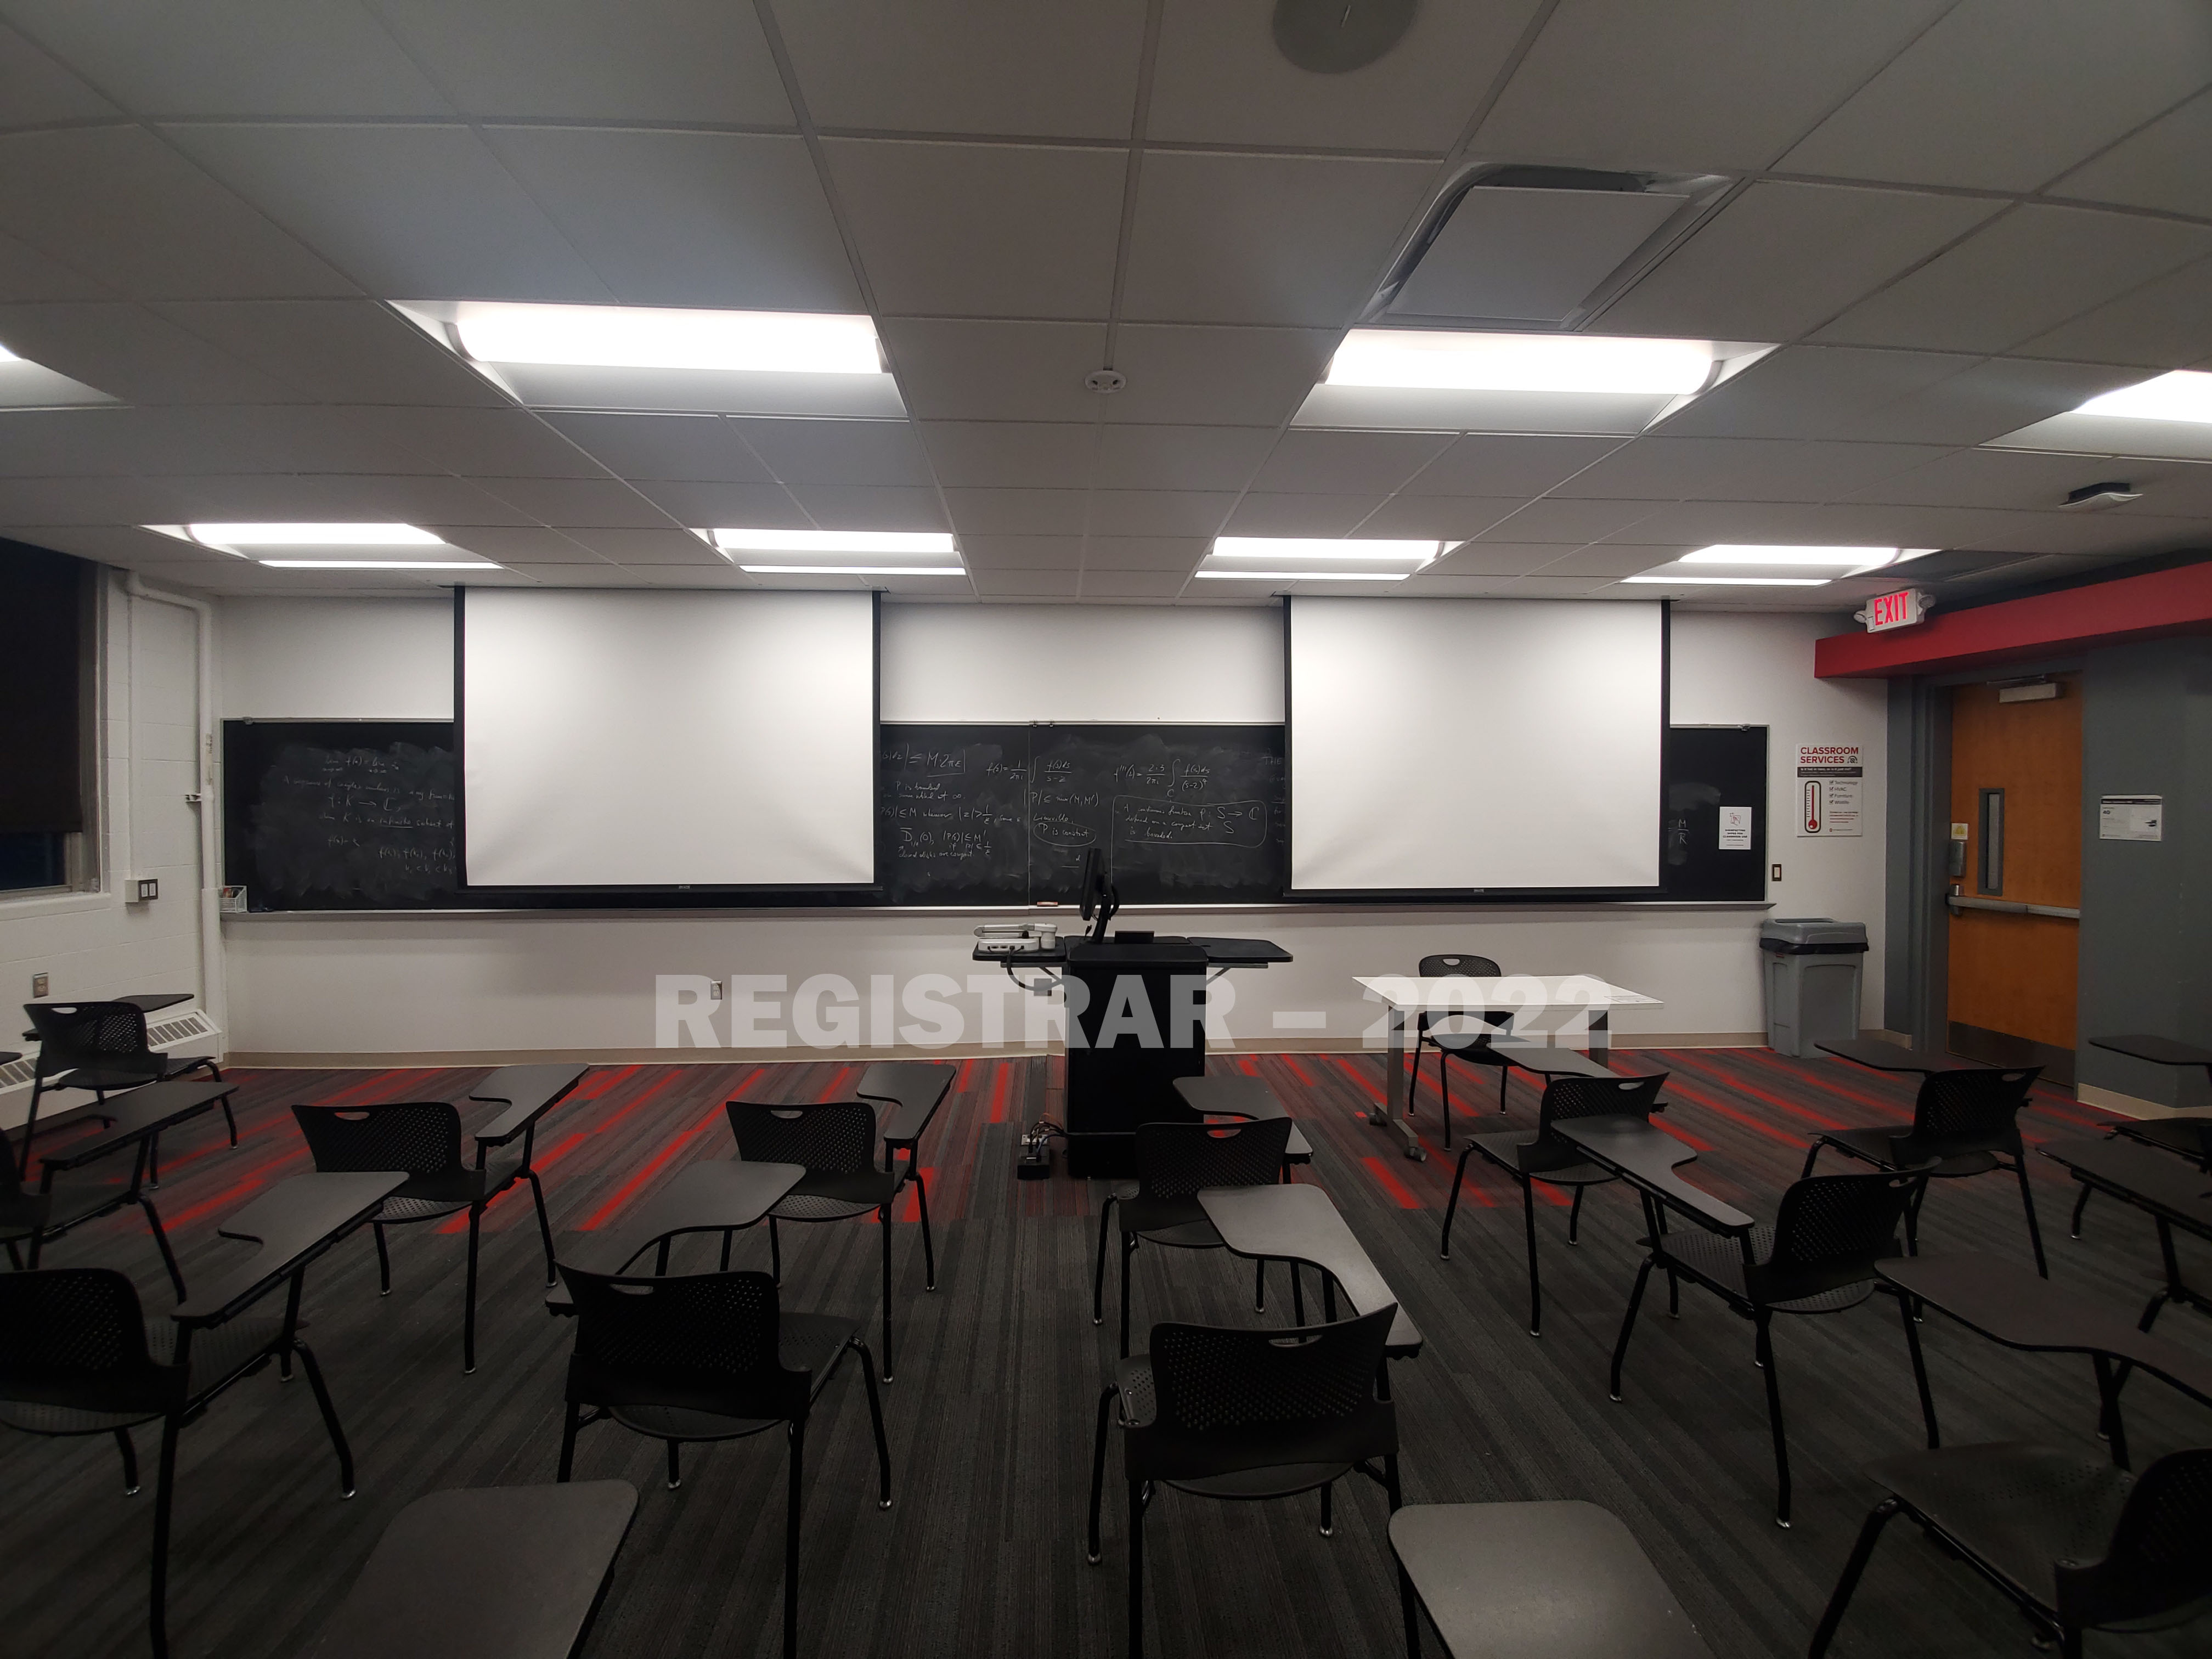 Baker Systems Engineering room 140 ultra wide angle view from the back of the room with projector screen down